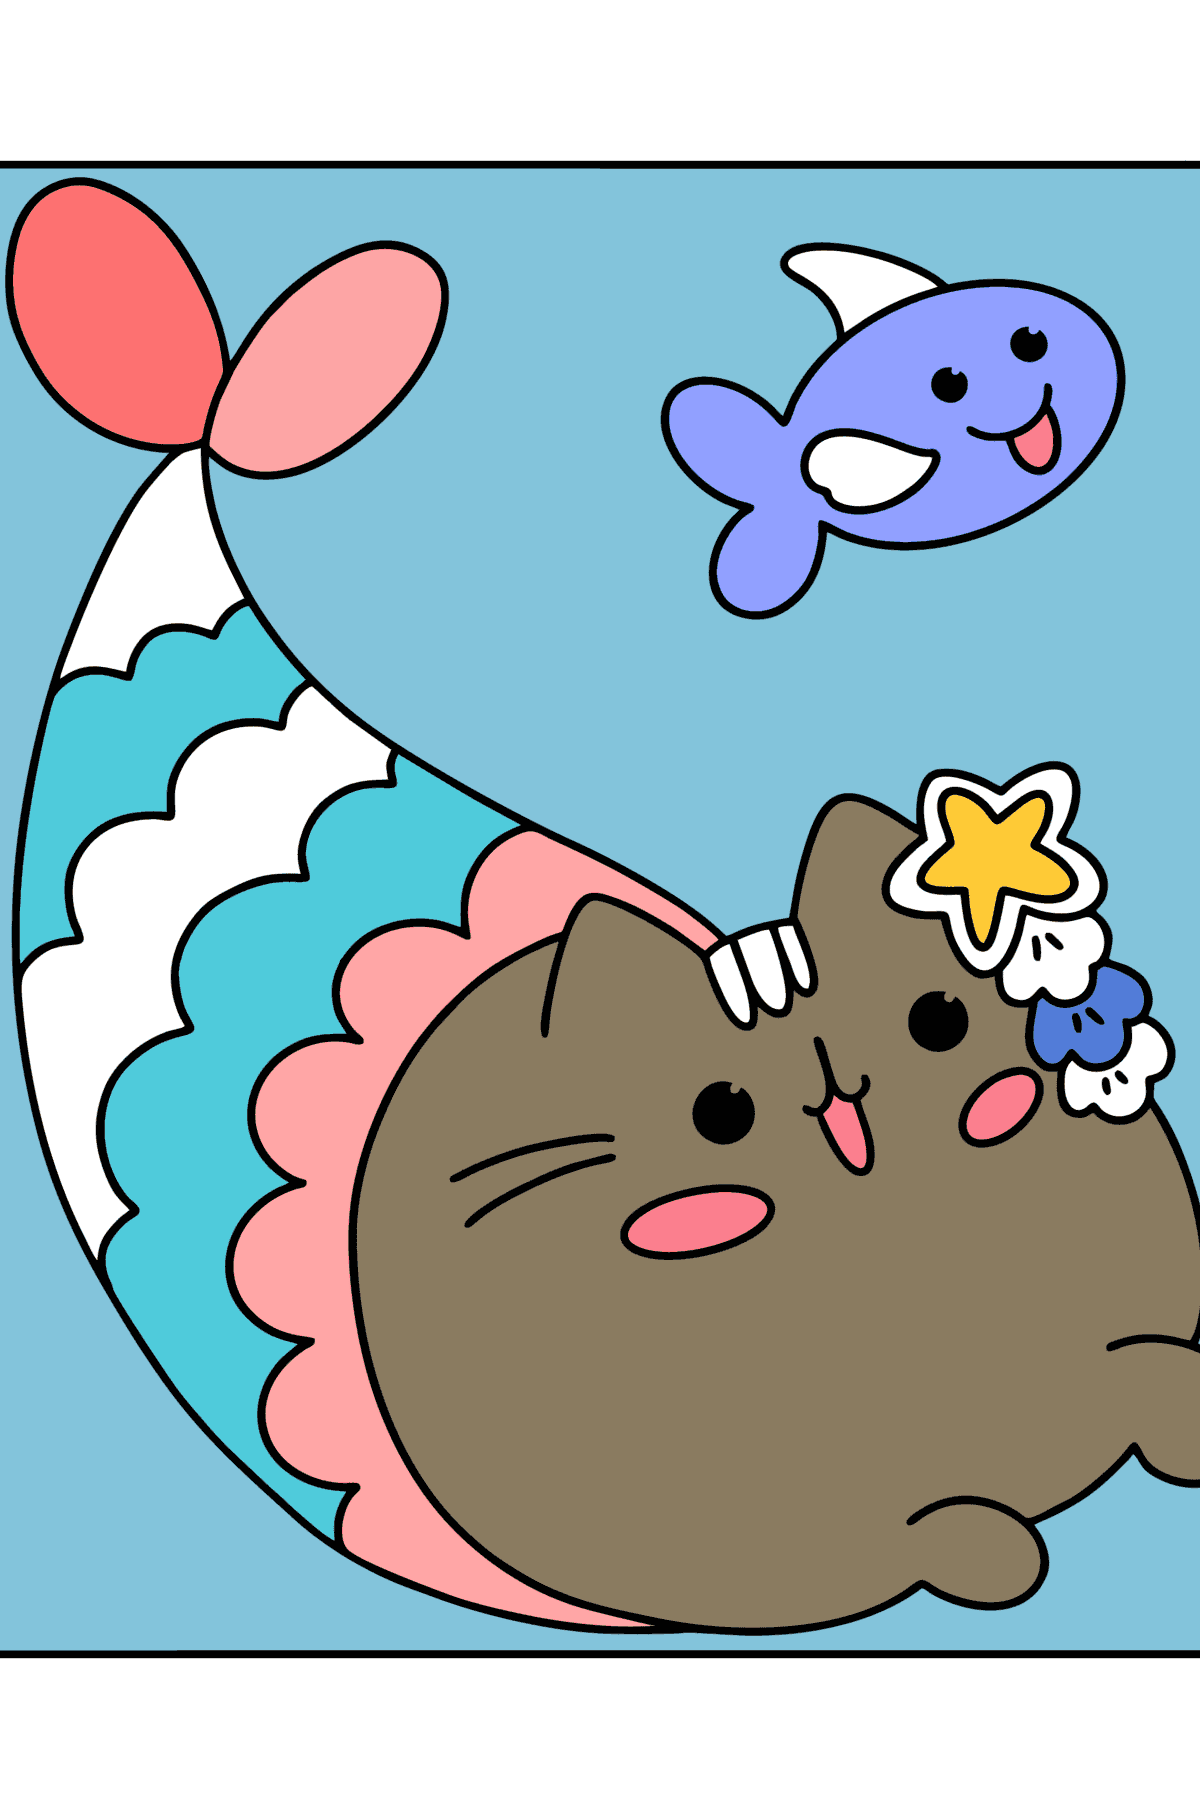 Pusheen mermaid сoloring page - Coloring Pages for Kids